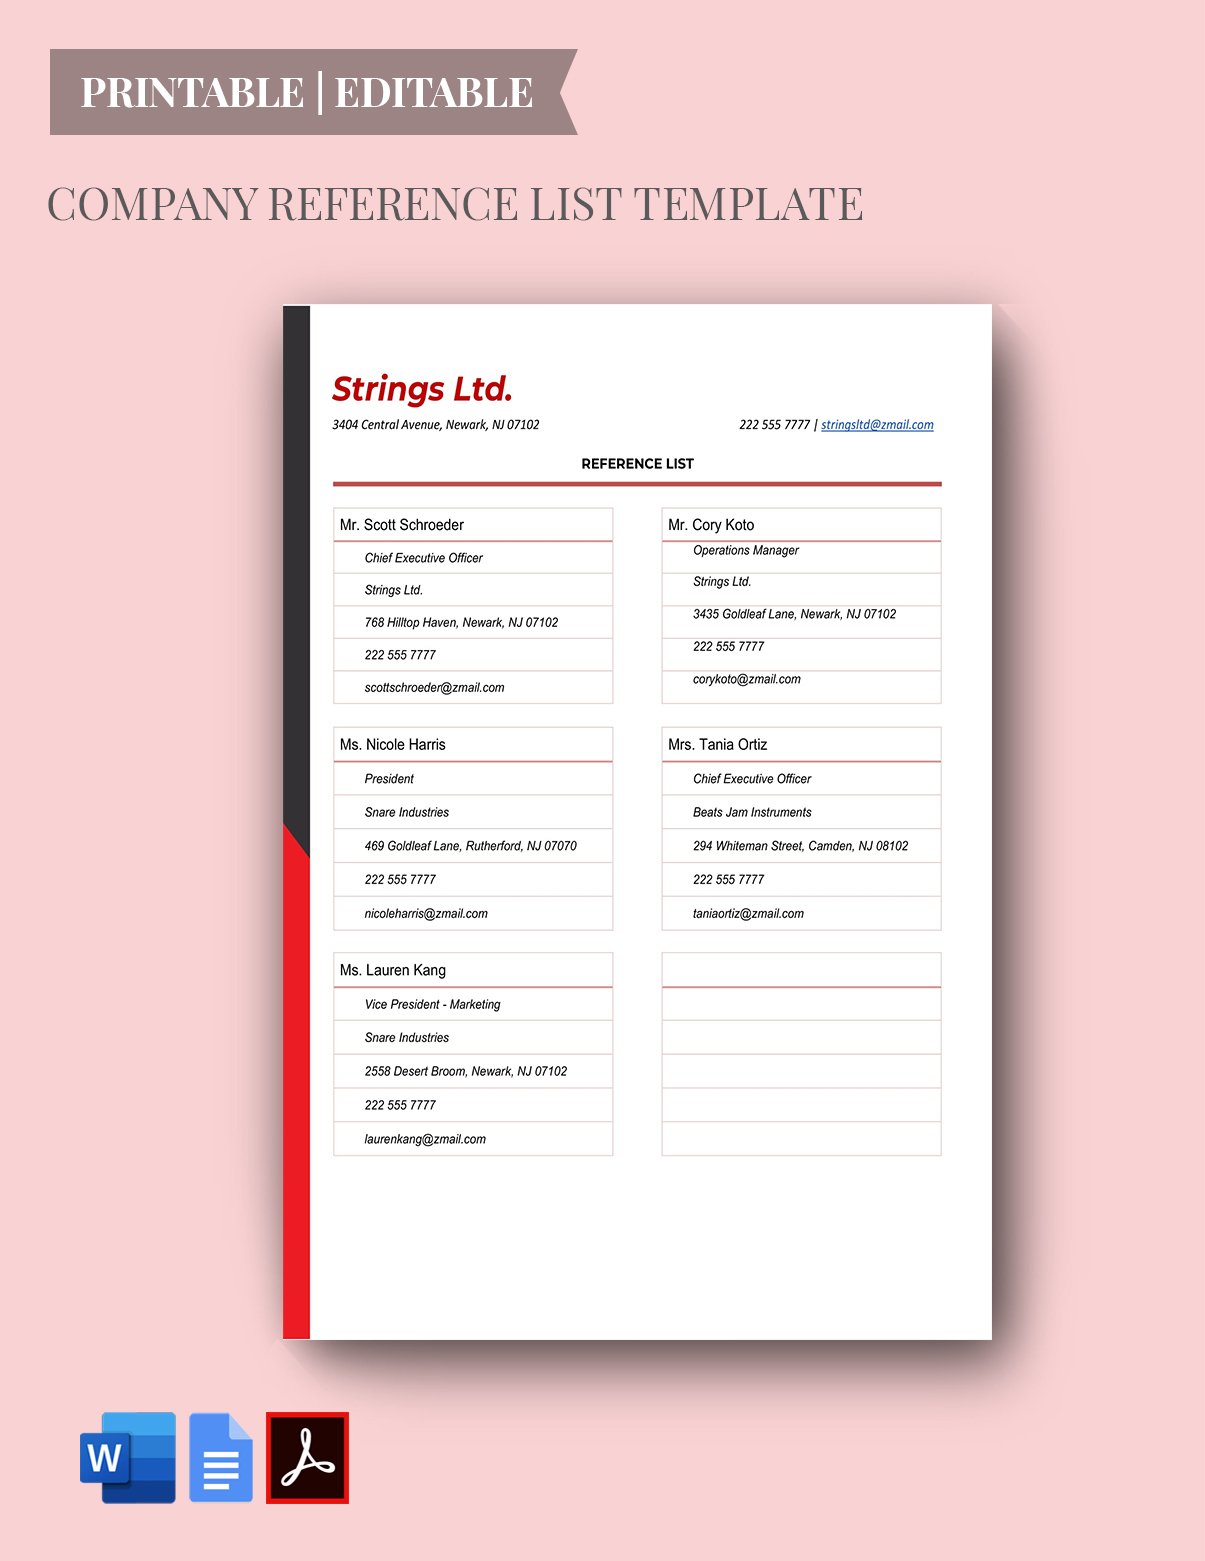 Company Reference List Template